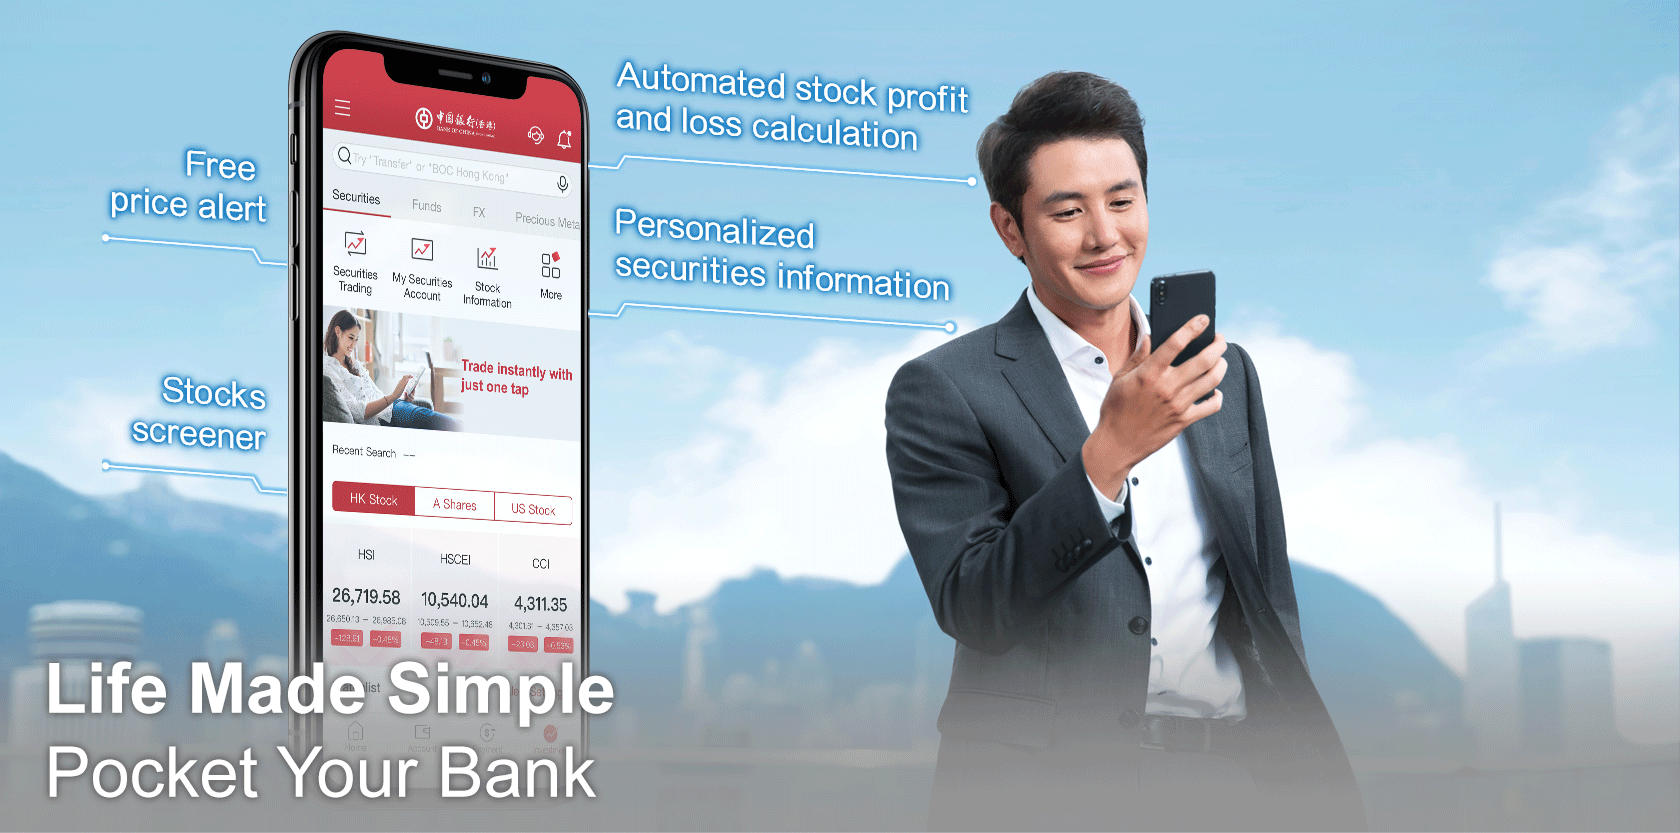 Life Made Simple Pocket Your Bank
Stock profit and loss automatic calculated to help you see it with just one click